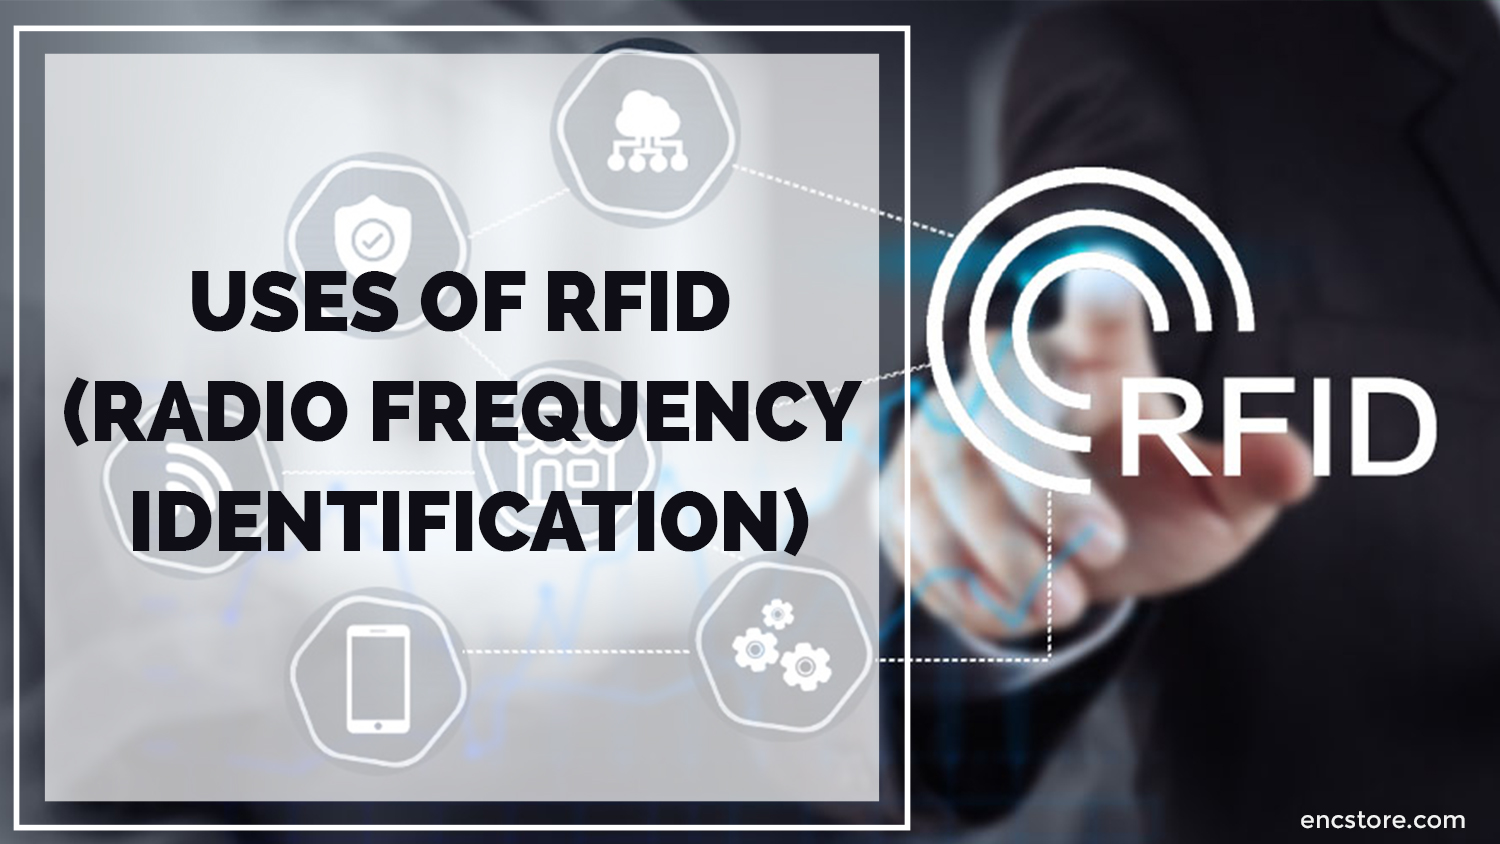 Uses of RFID (Radio Frequency Identification)